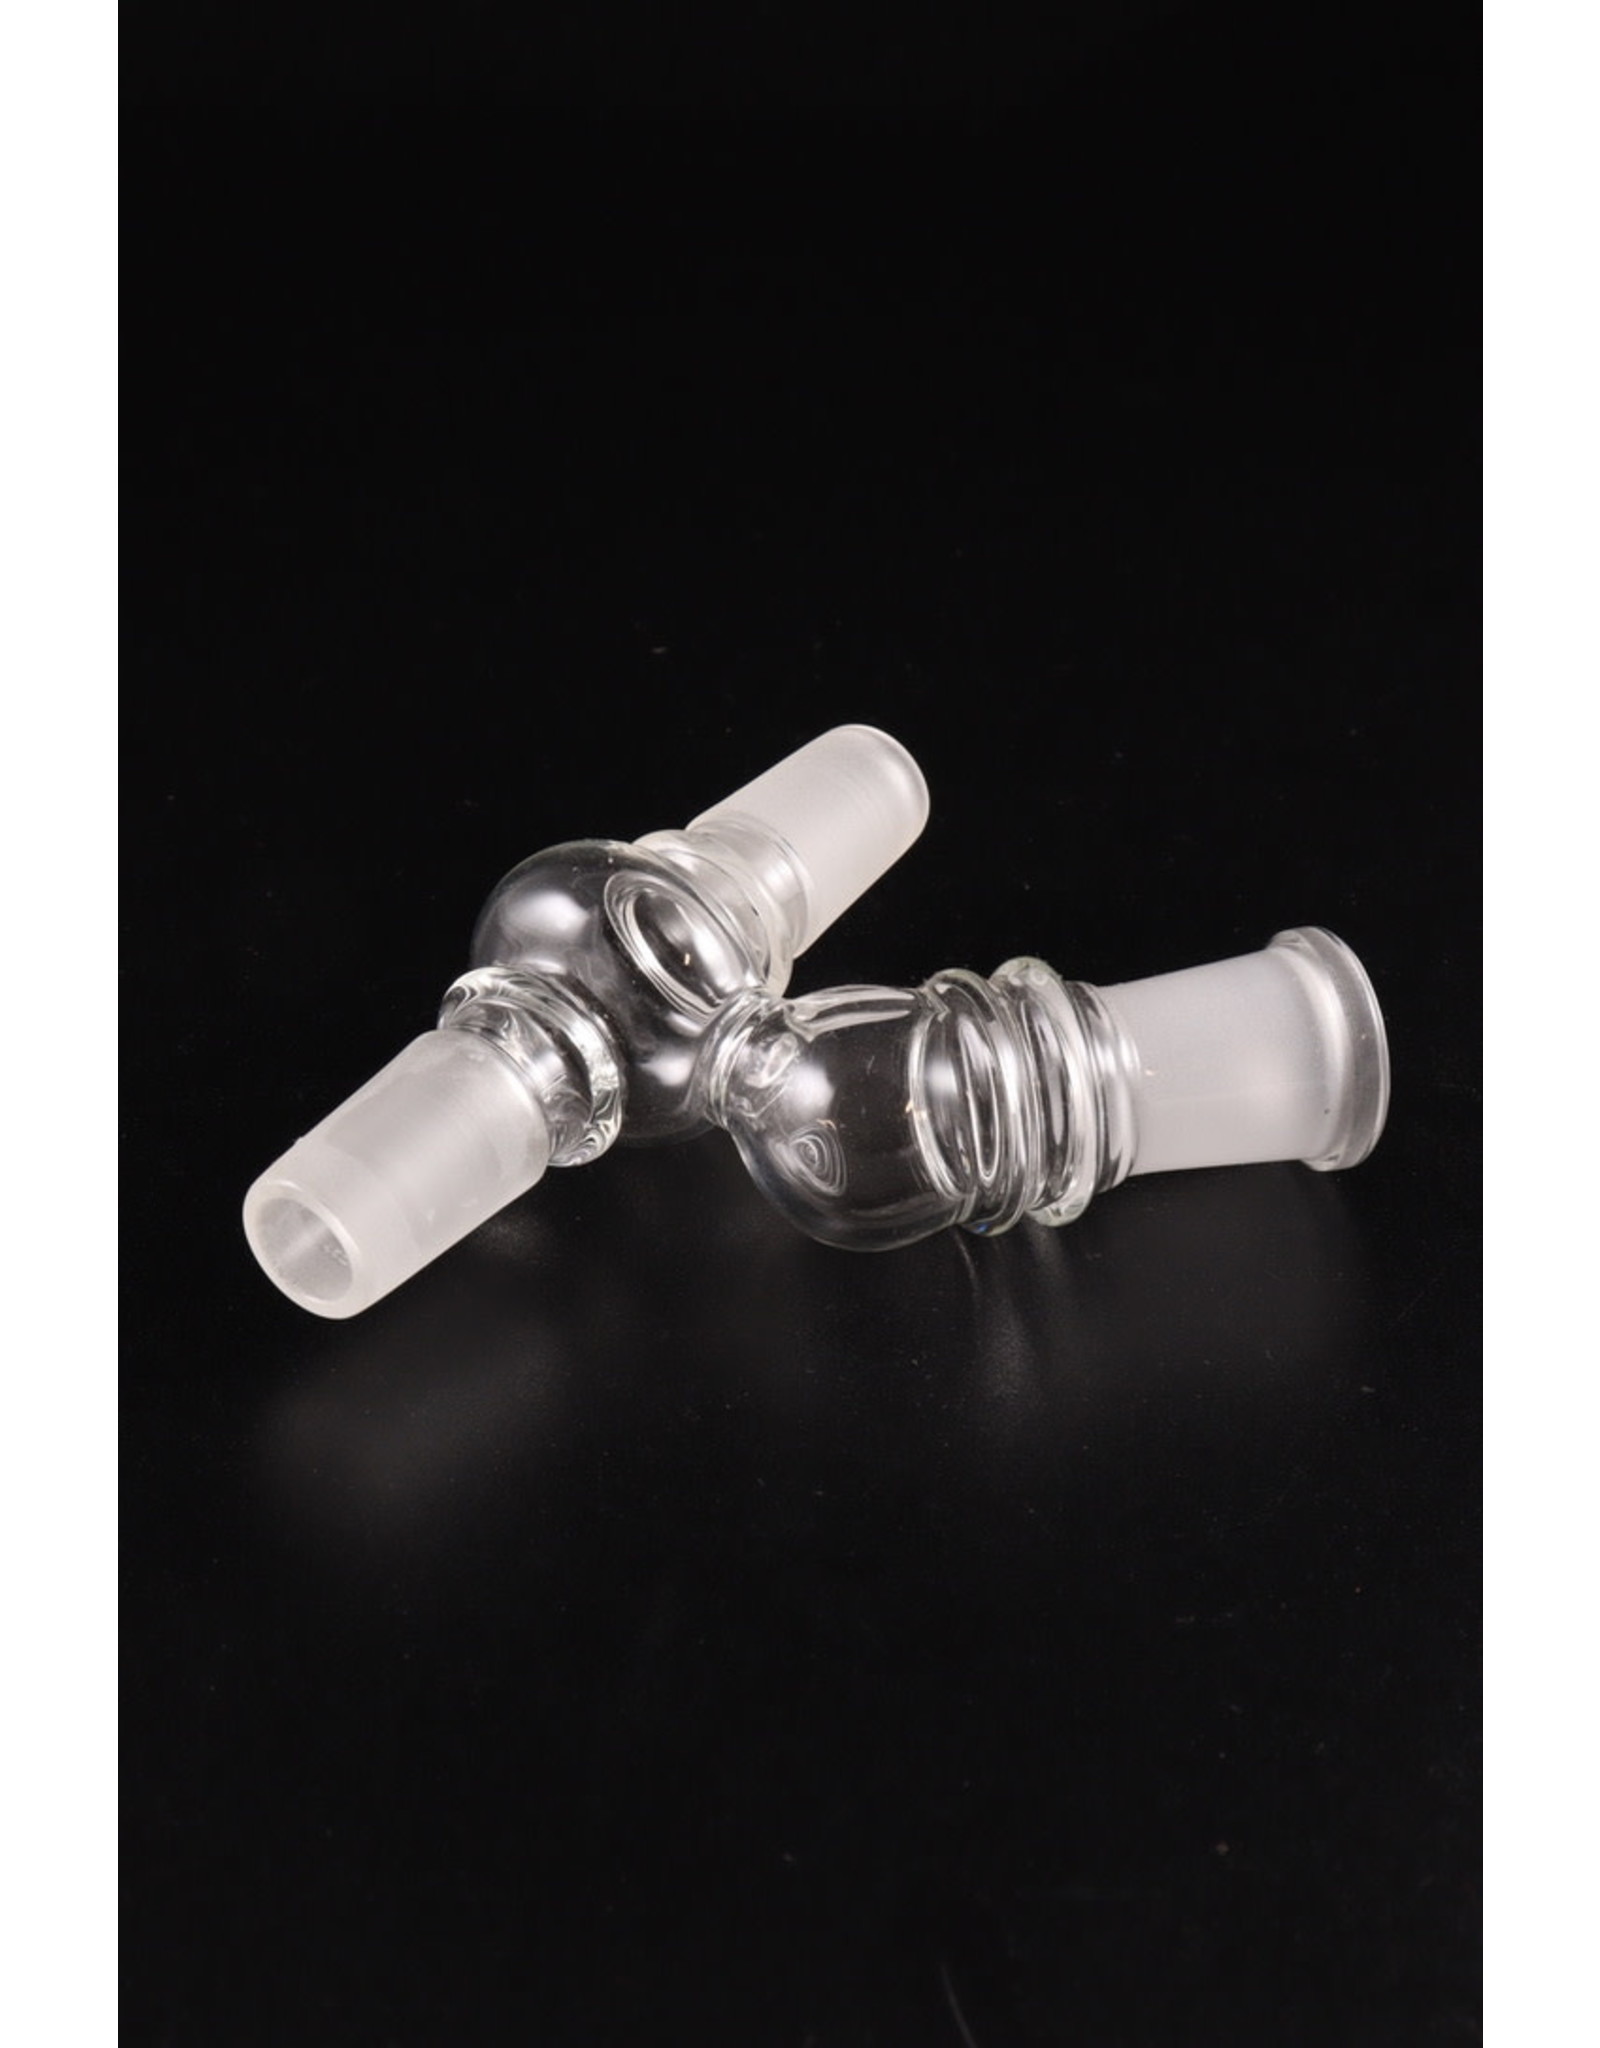 DSK Distribution 19mm Female to 19mm Male/19mm Male - 45˚ Reclaim Collector